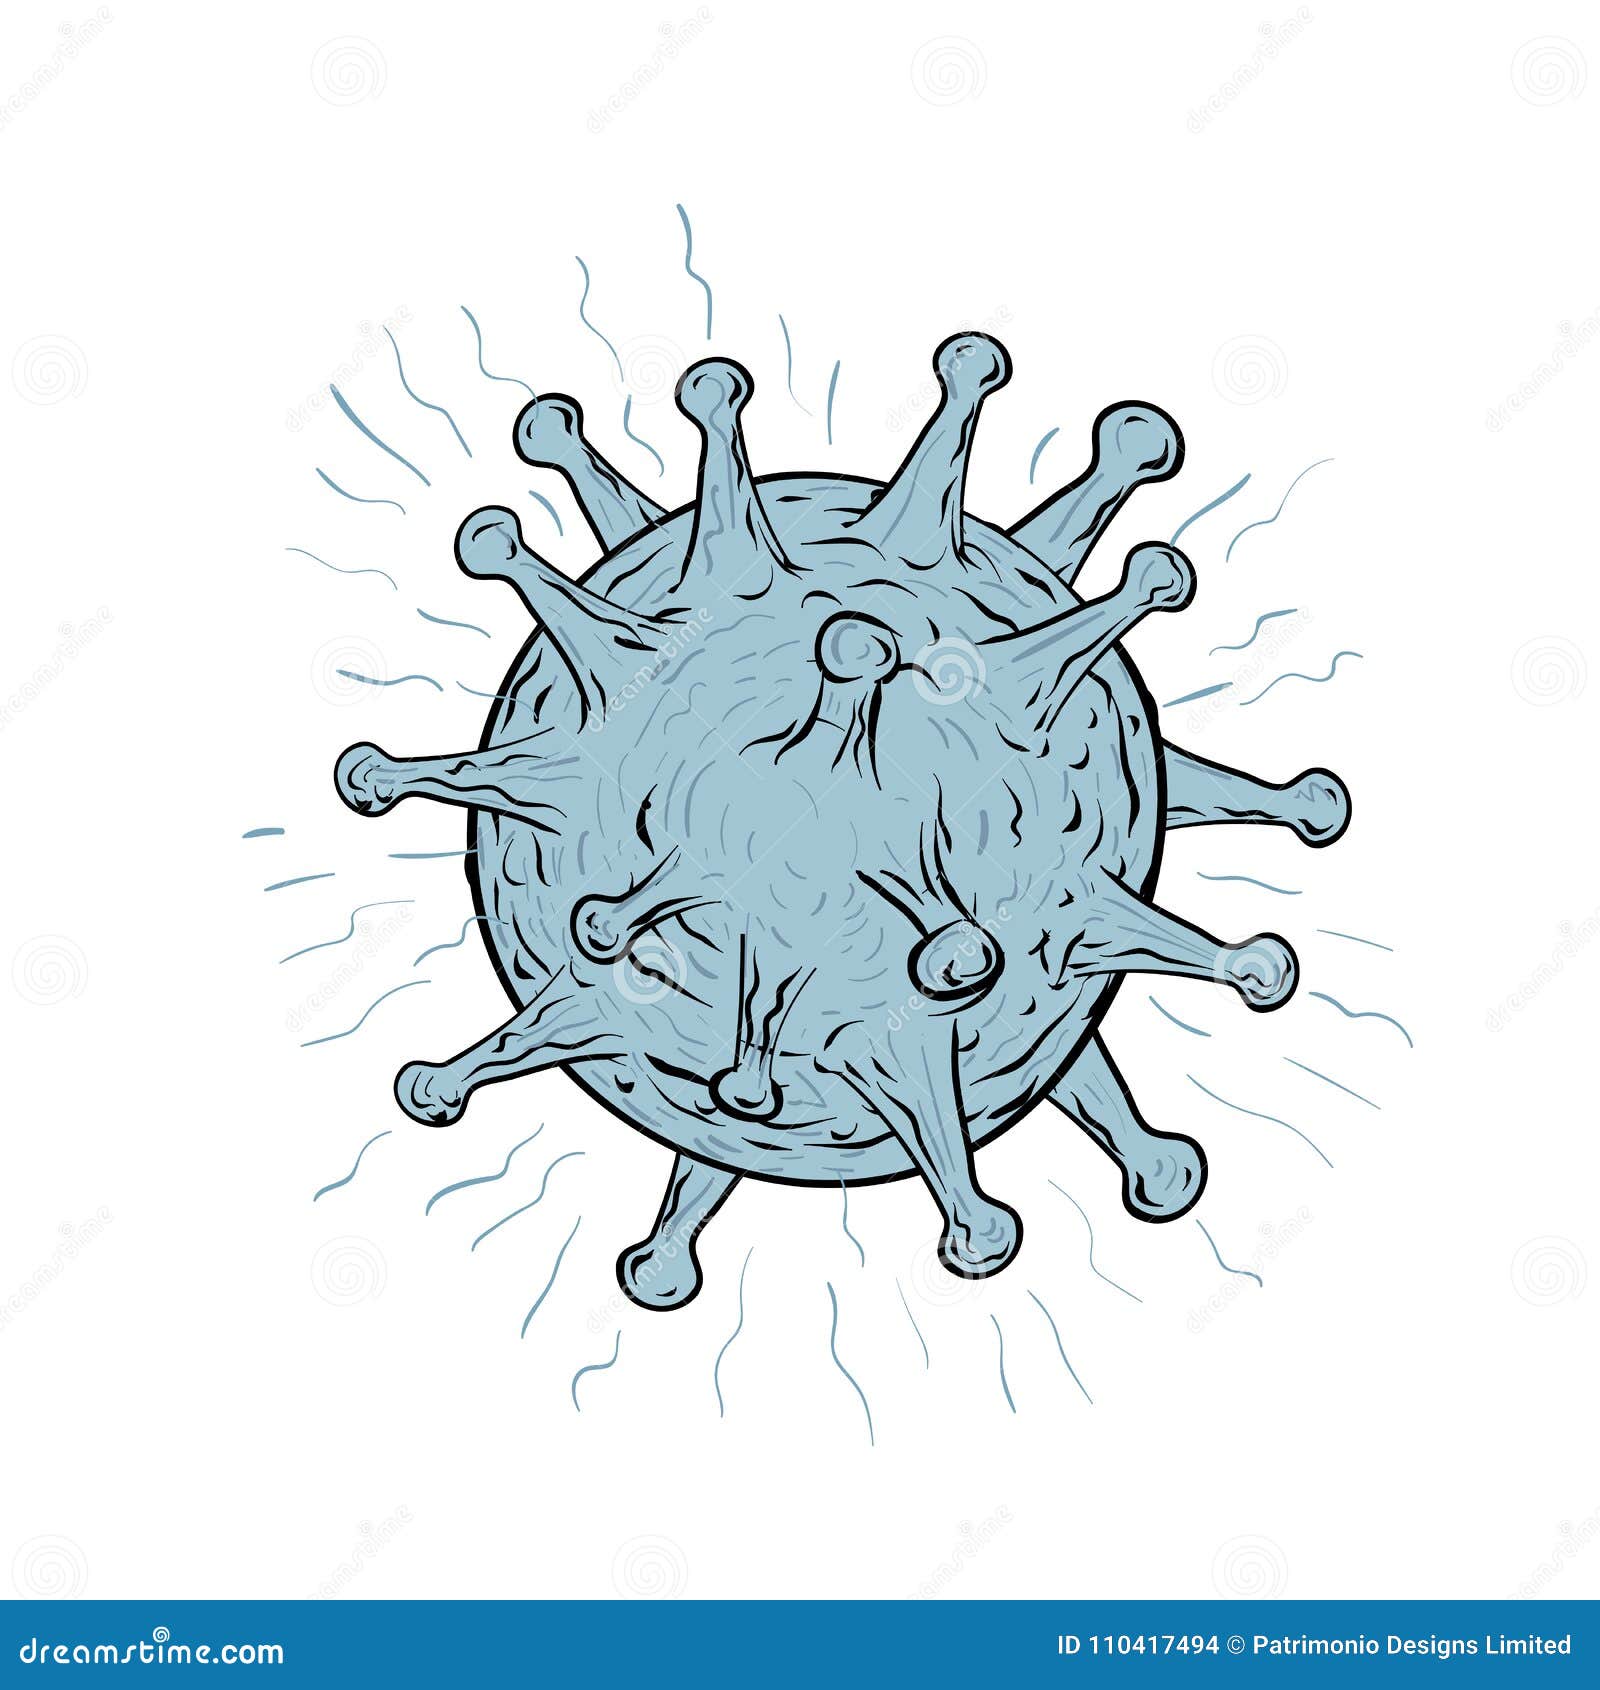 Virus Disegno - Coronavirus Ecco L Immagine Del Virus Realizzata Negli Usa - Viruses infect all types of life forms, from animals and plants to microorganisms.